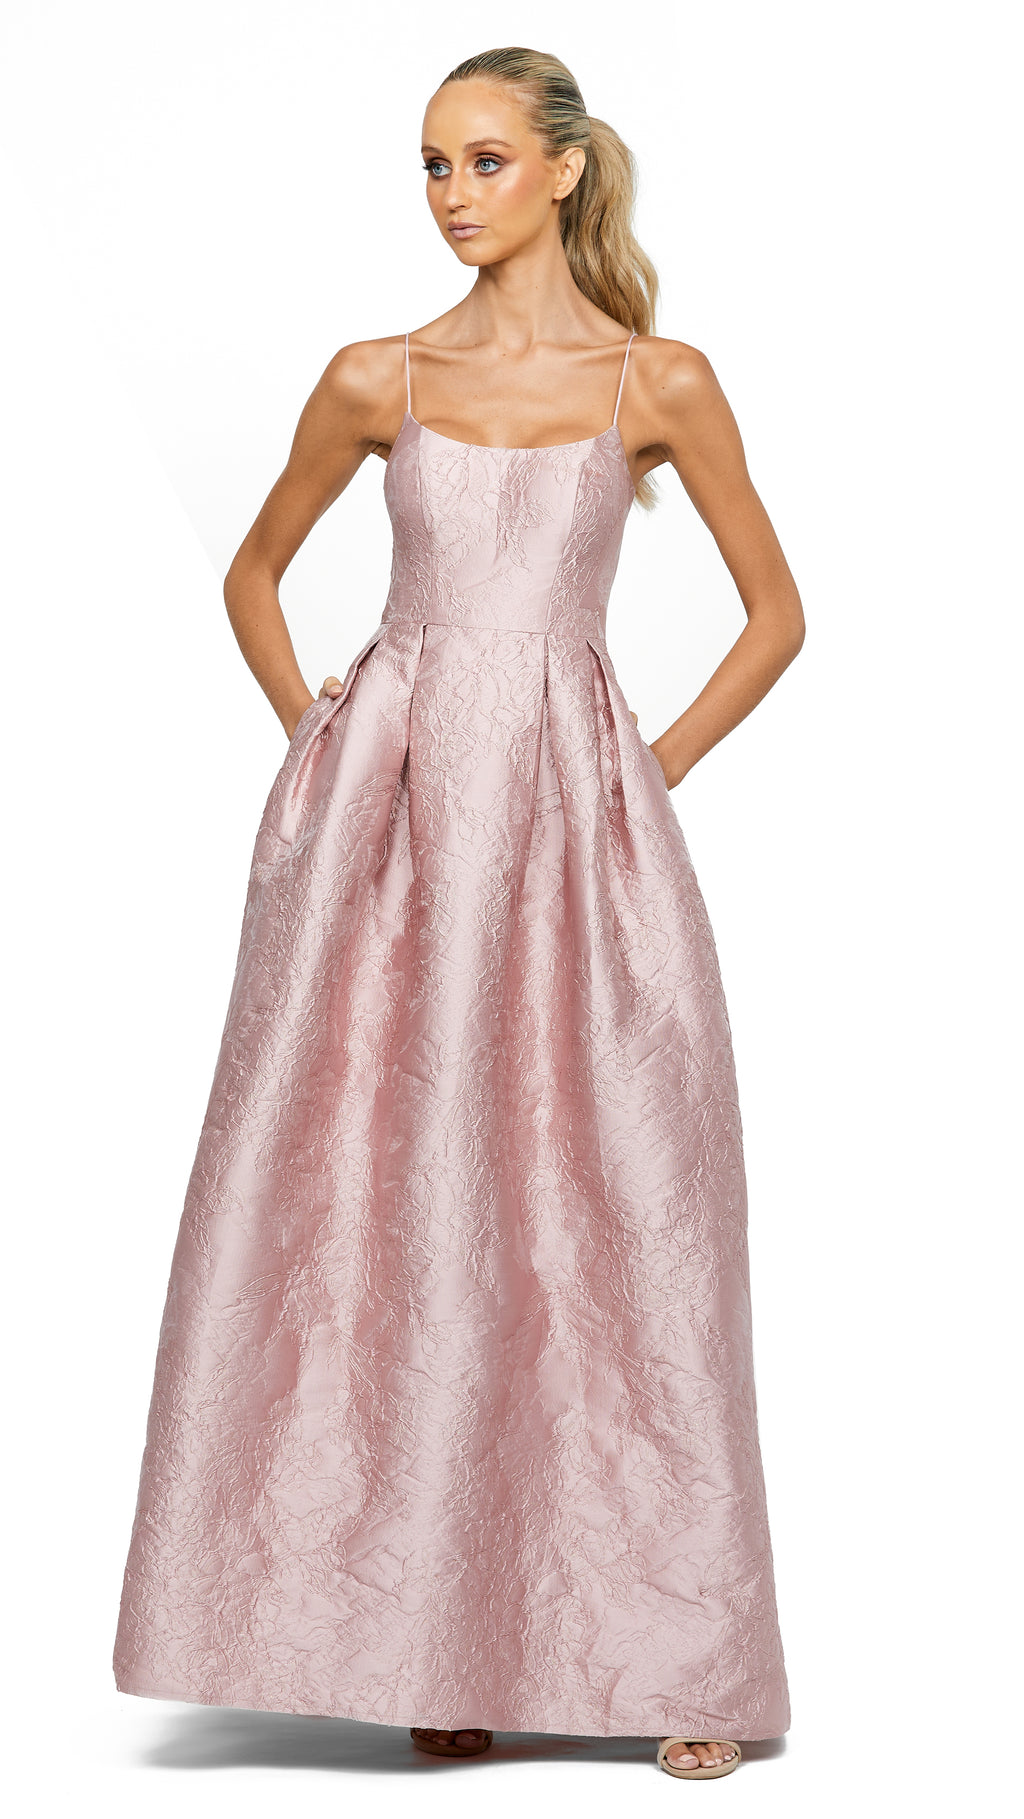 Balmy Nights Scoop Ball Gown in Blush/Gold